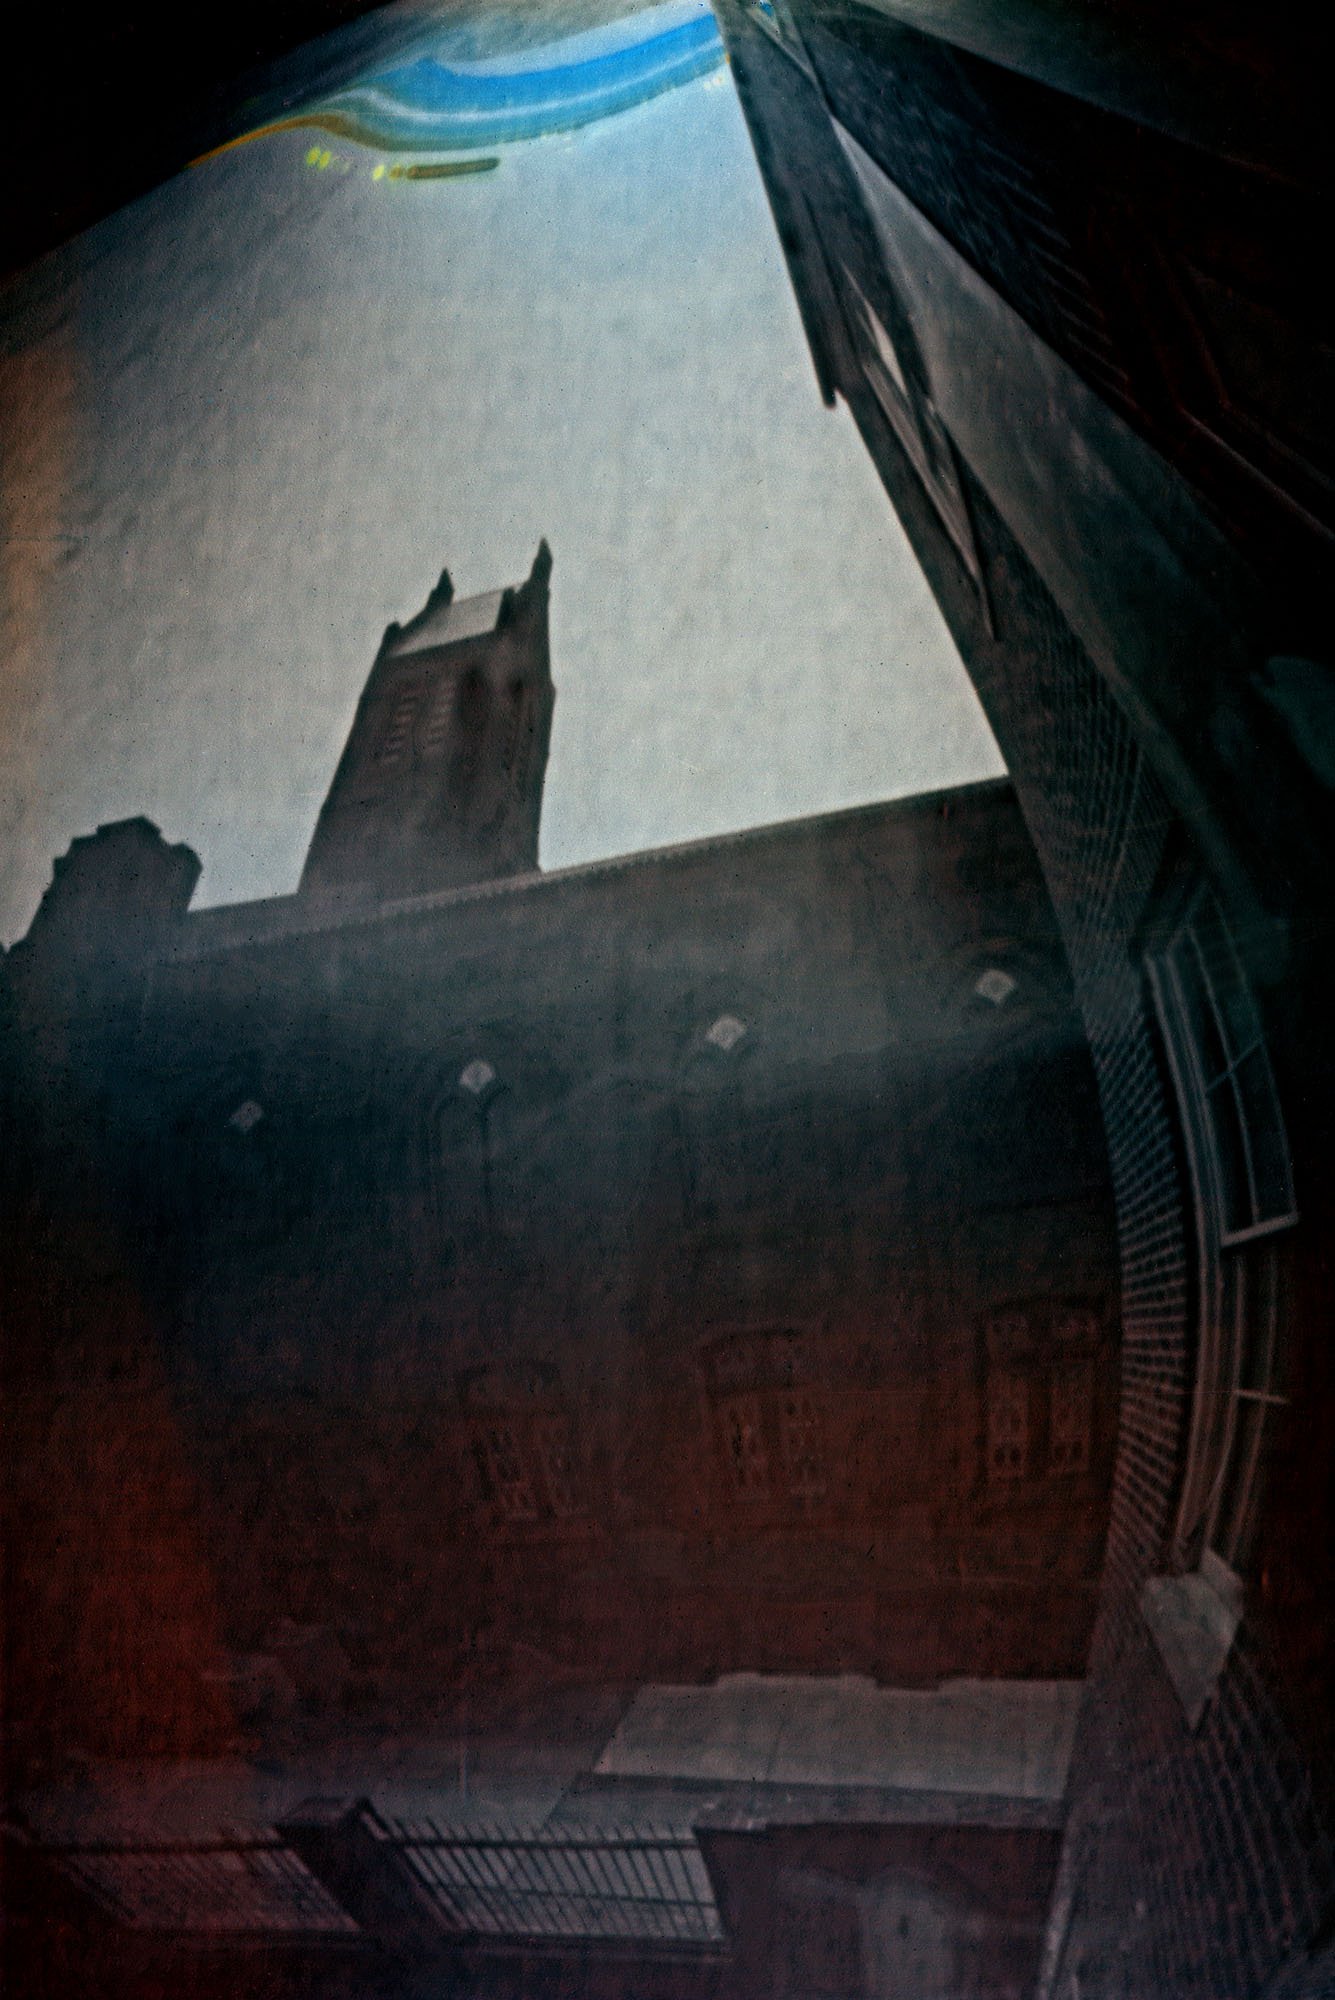 In an image made with a non-standard camera, the top of a chuch is seen against the sky.